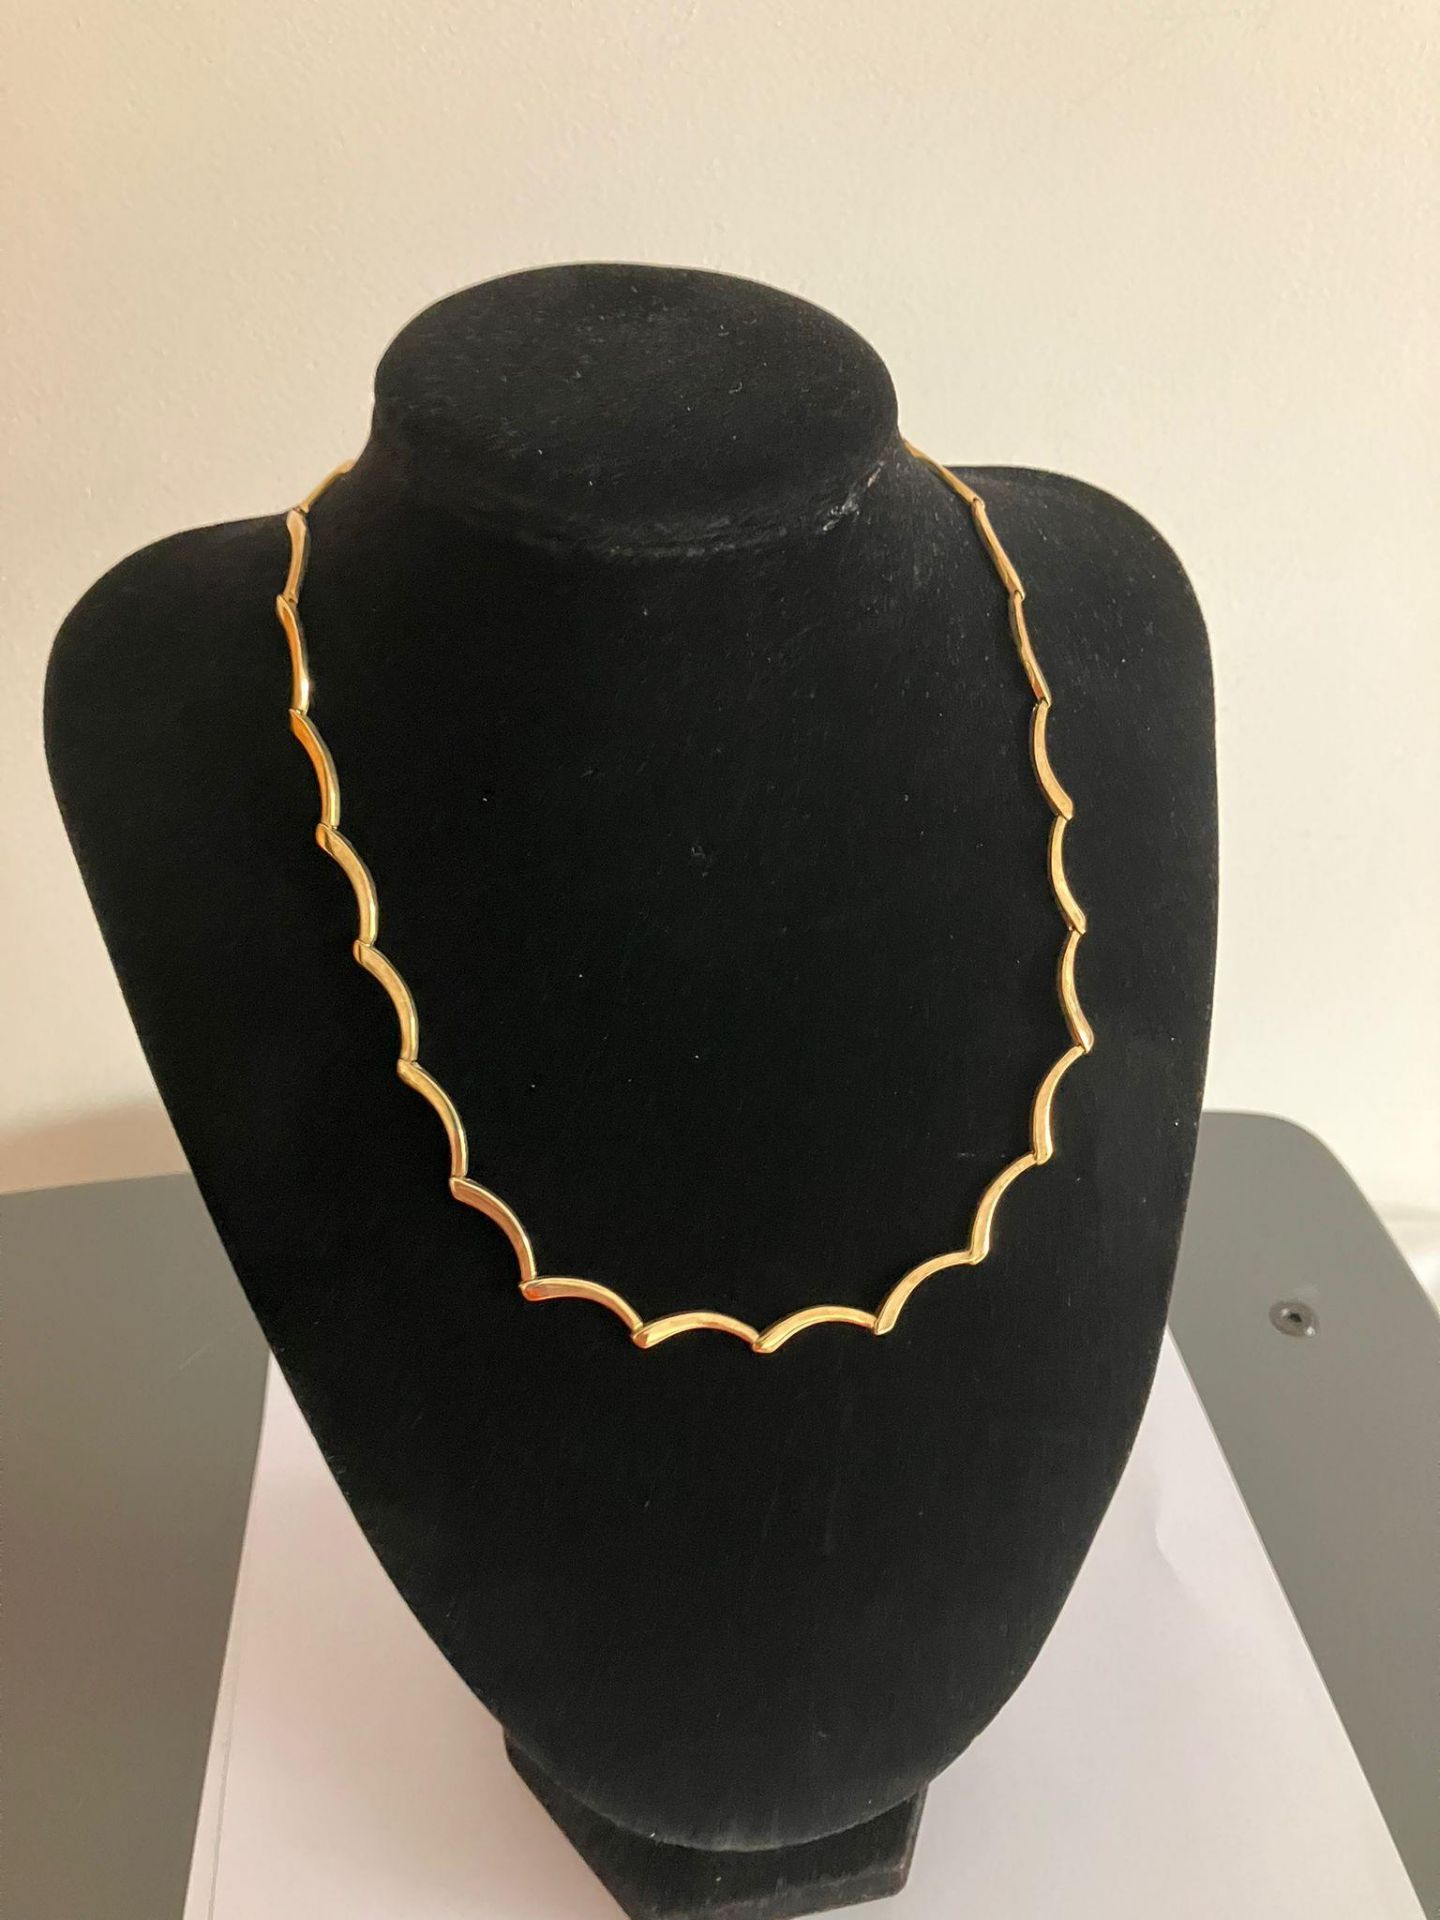 Attractive and unusual 9 carat YELLOW GOLD NECKLACE with wavy design. Full UK hallmark. 11 grams. 45